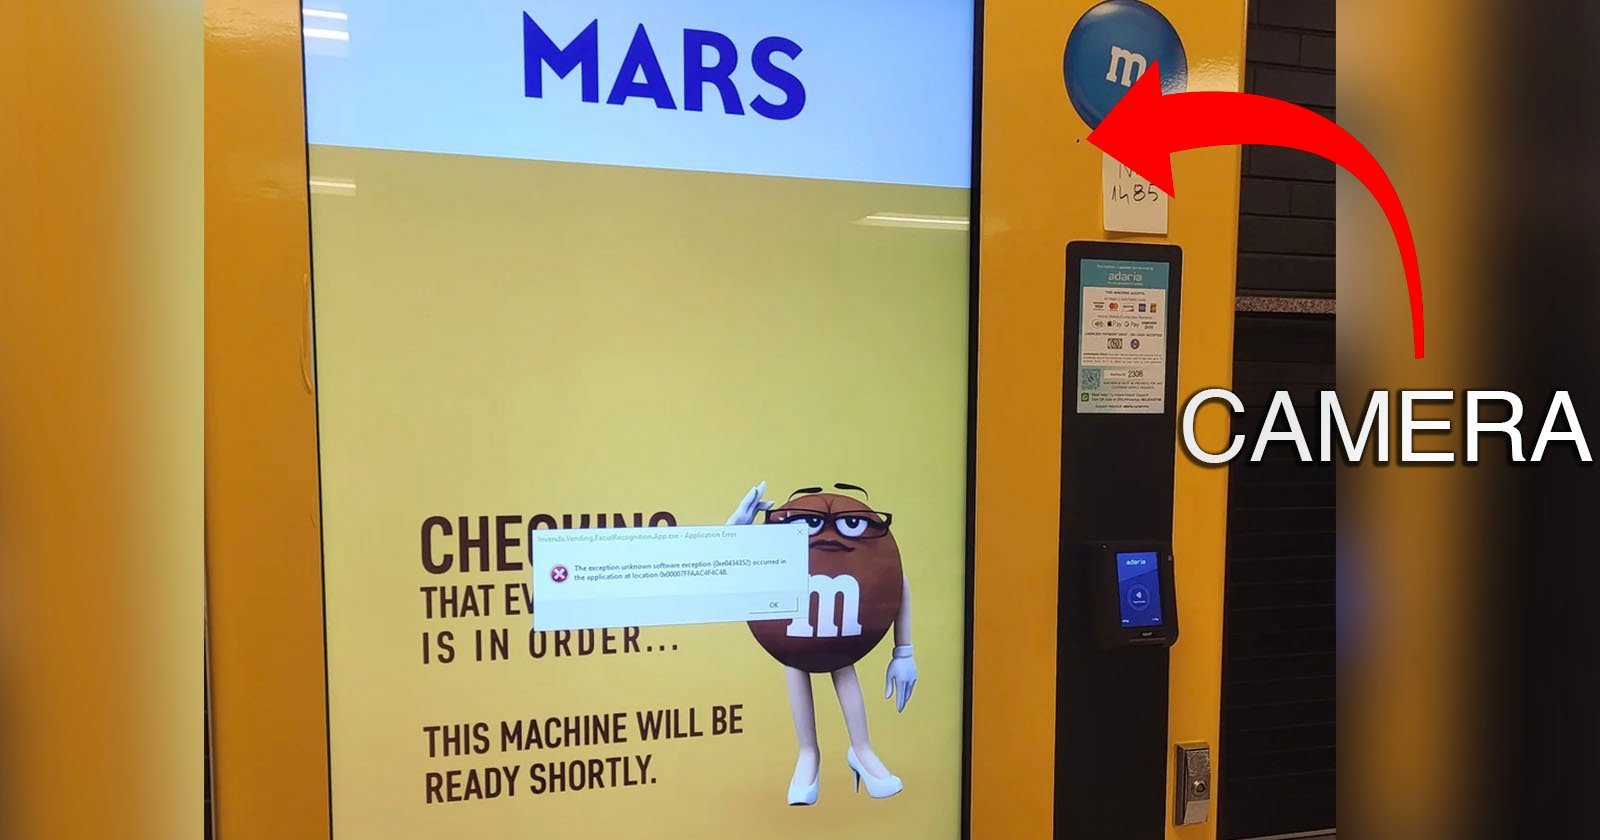 Students Discover M&M’s Vending Machine is Spying on Them